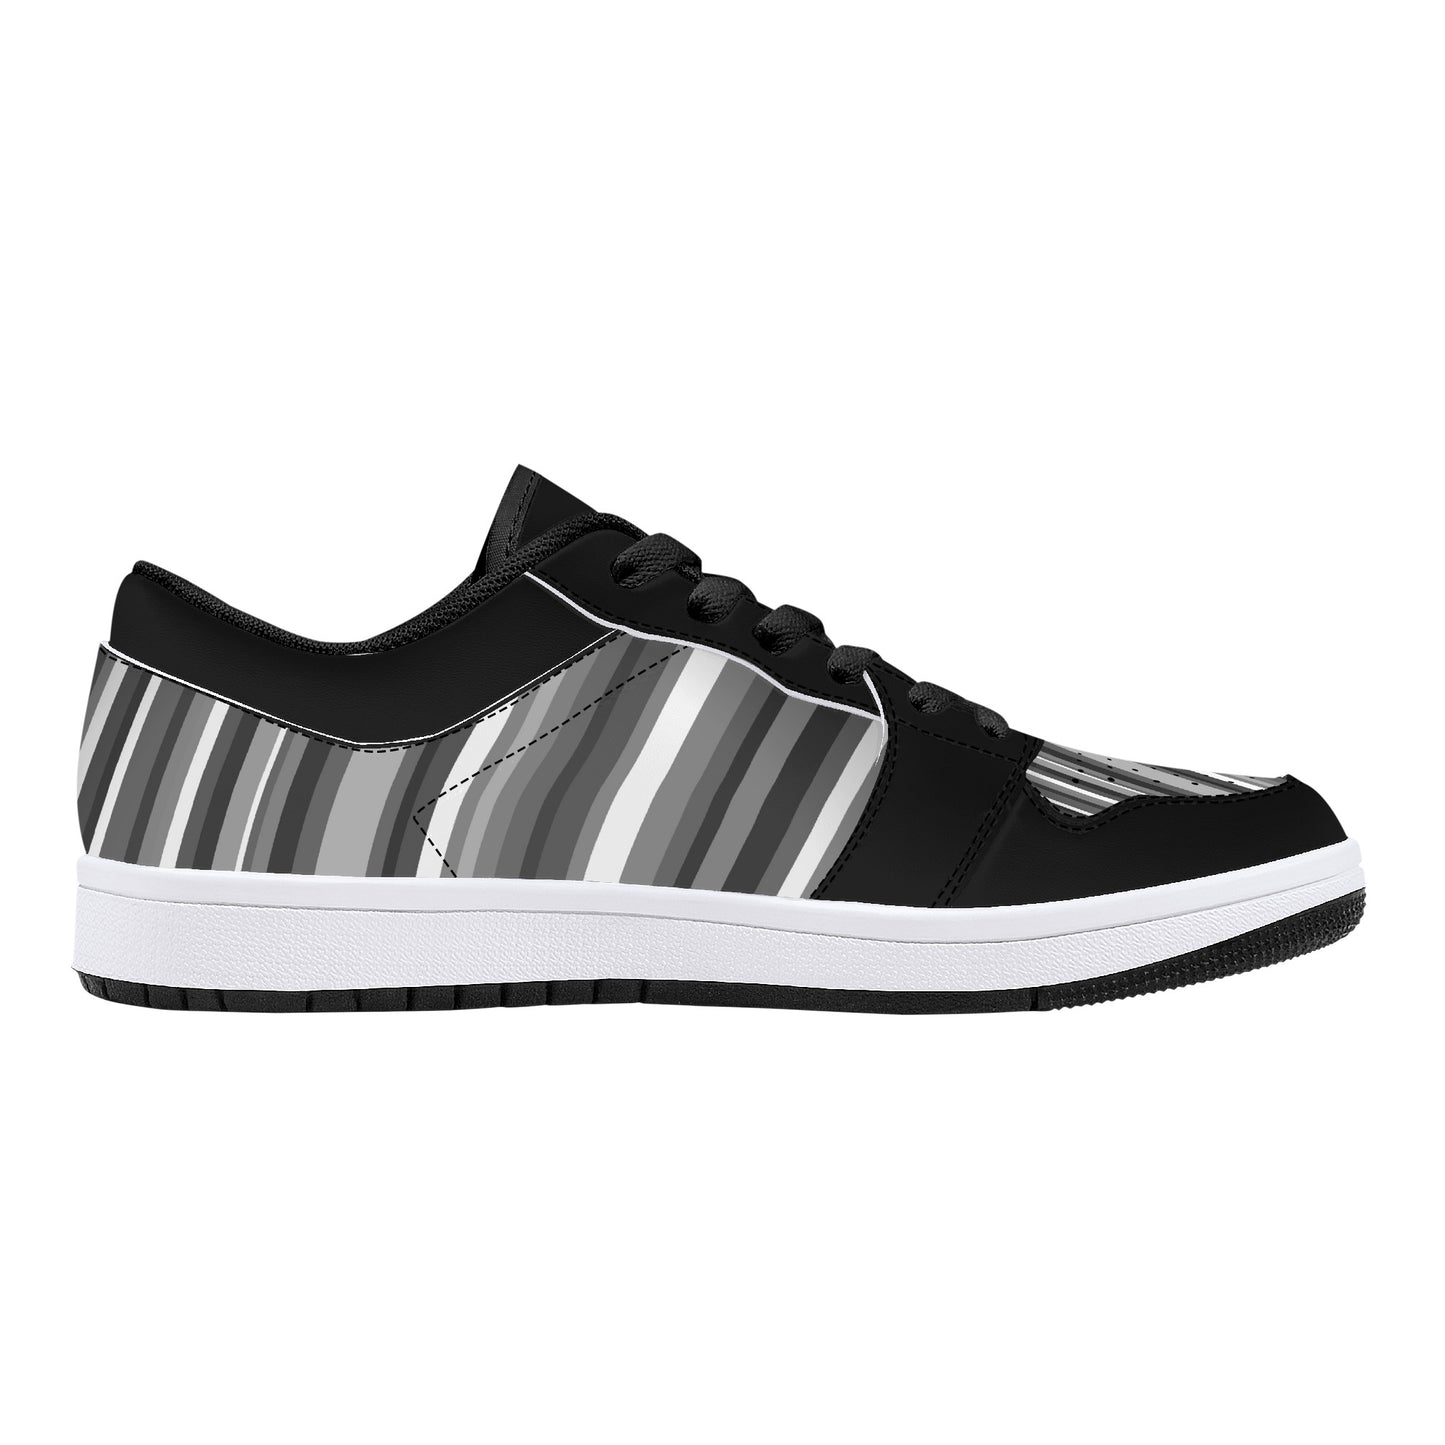 Leather Sneakers - Black & Grey Stripes